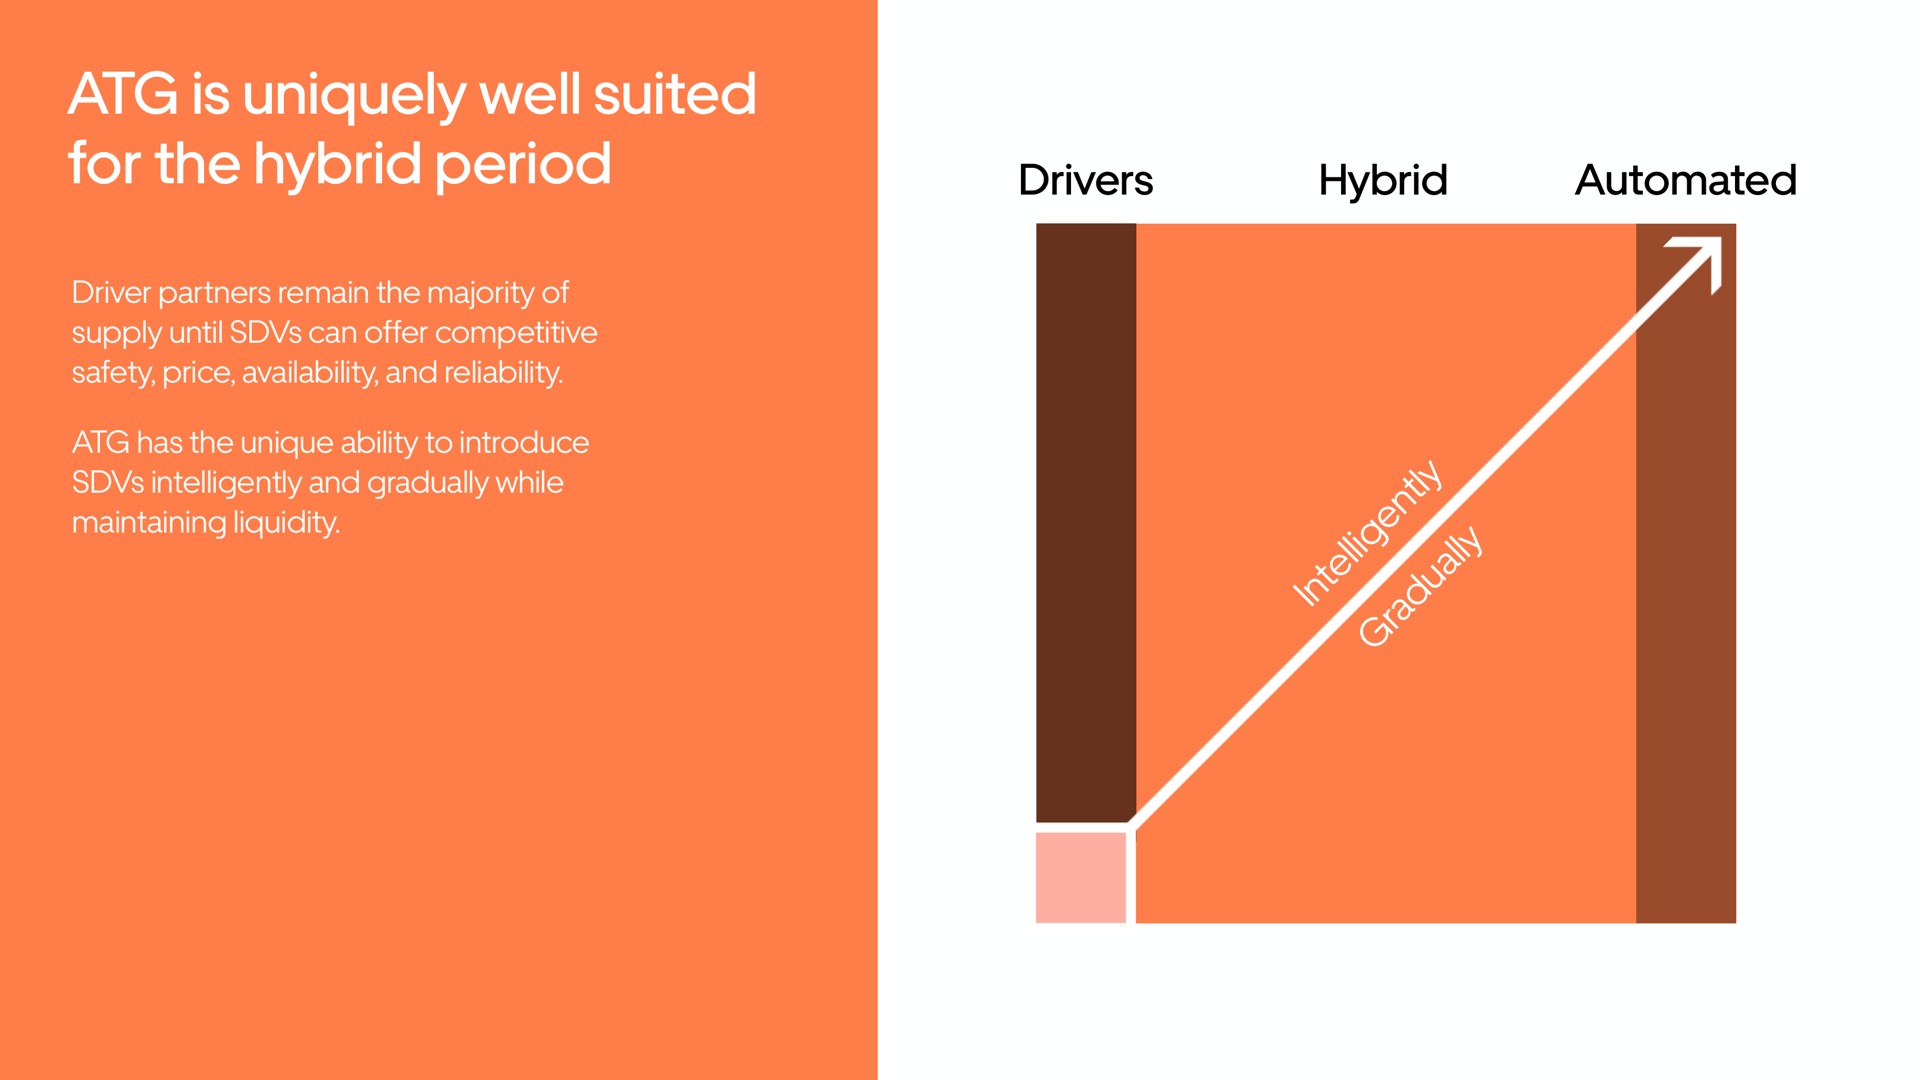 is uniquely well suited for the hybrid period | Uber